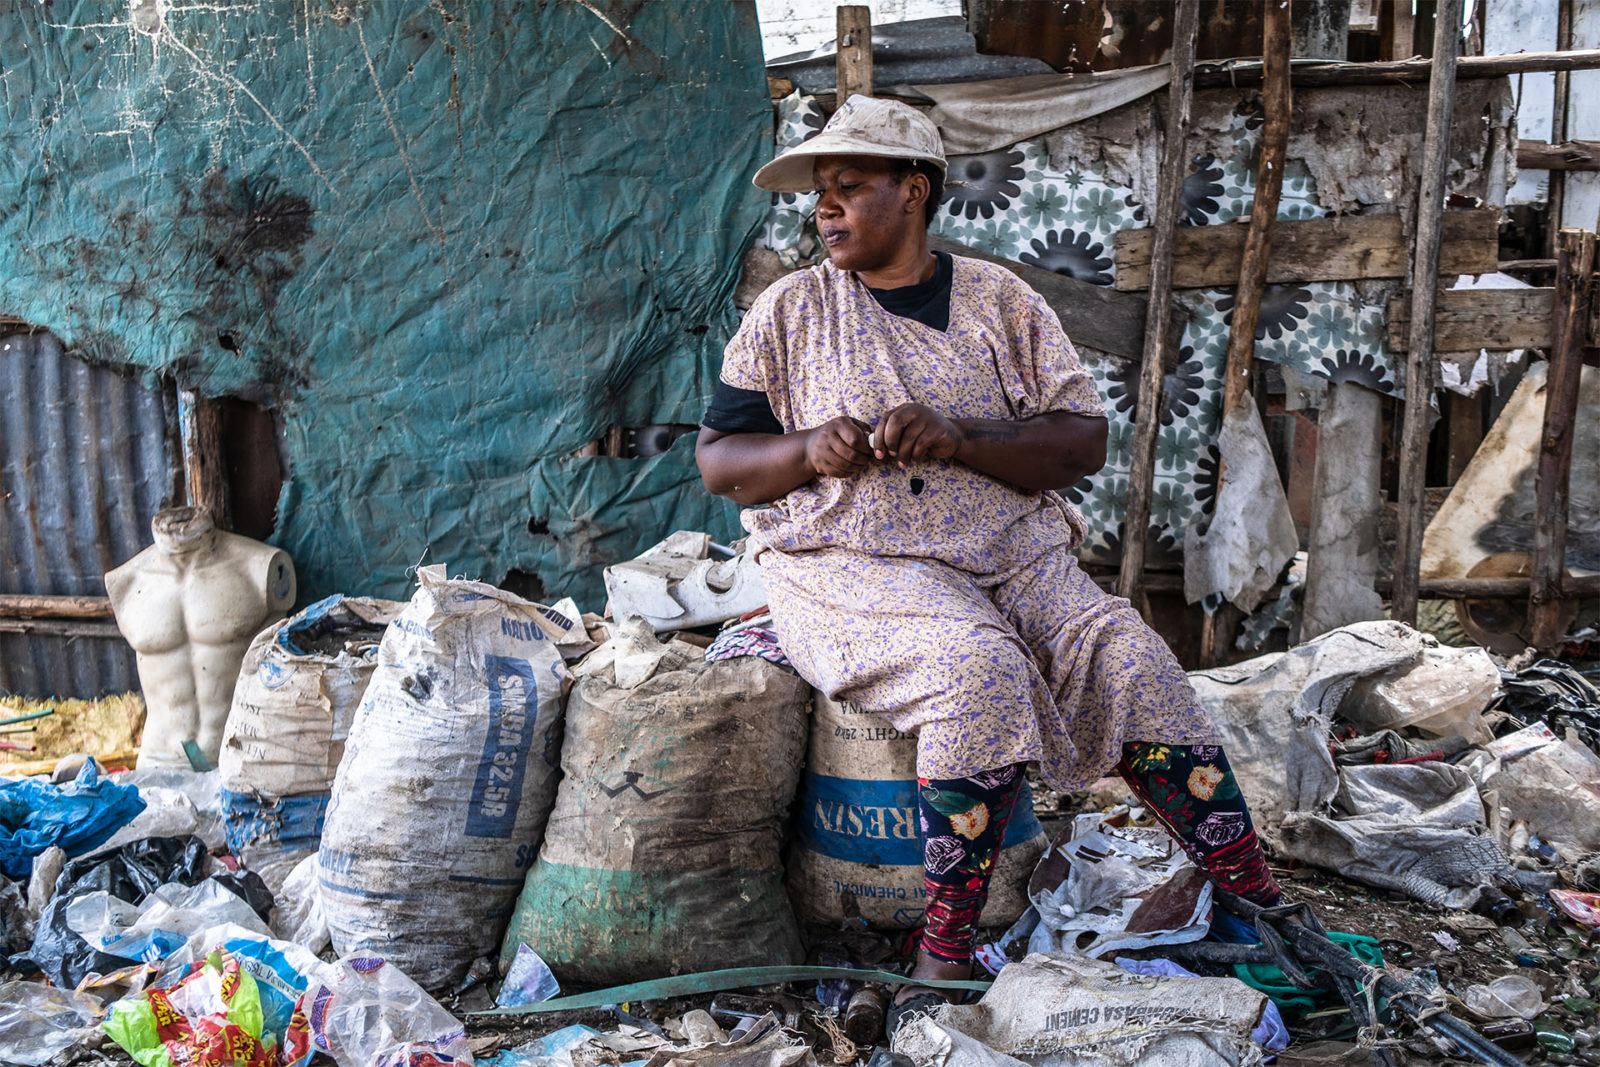 A photo of a woman sitting on bags of trash at a dumpsite